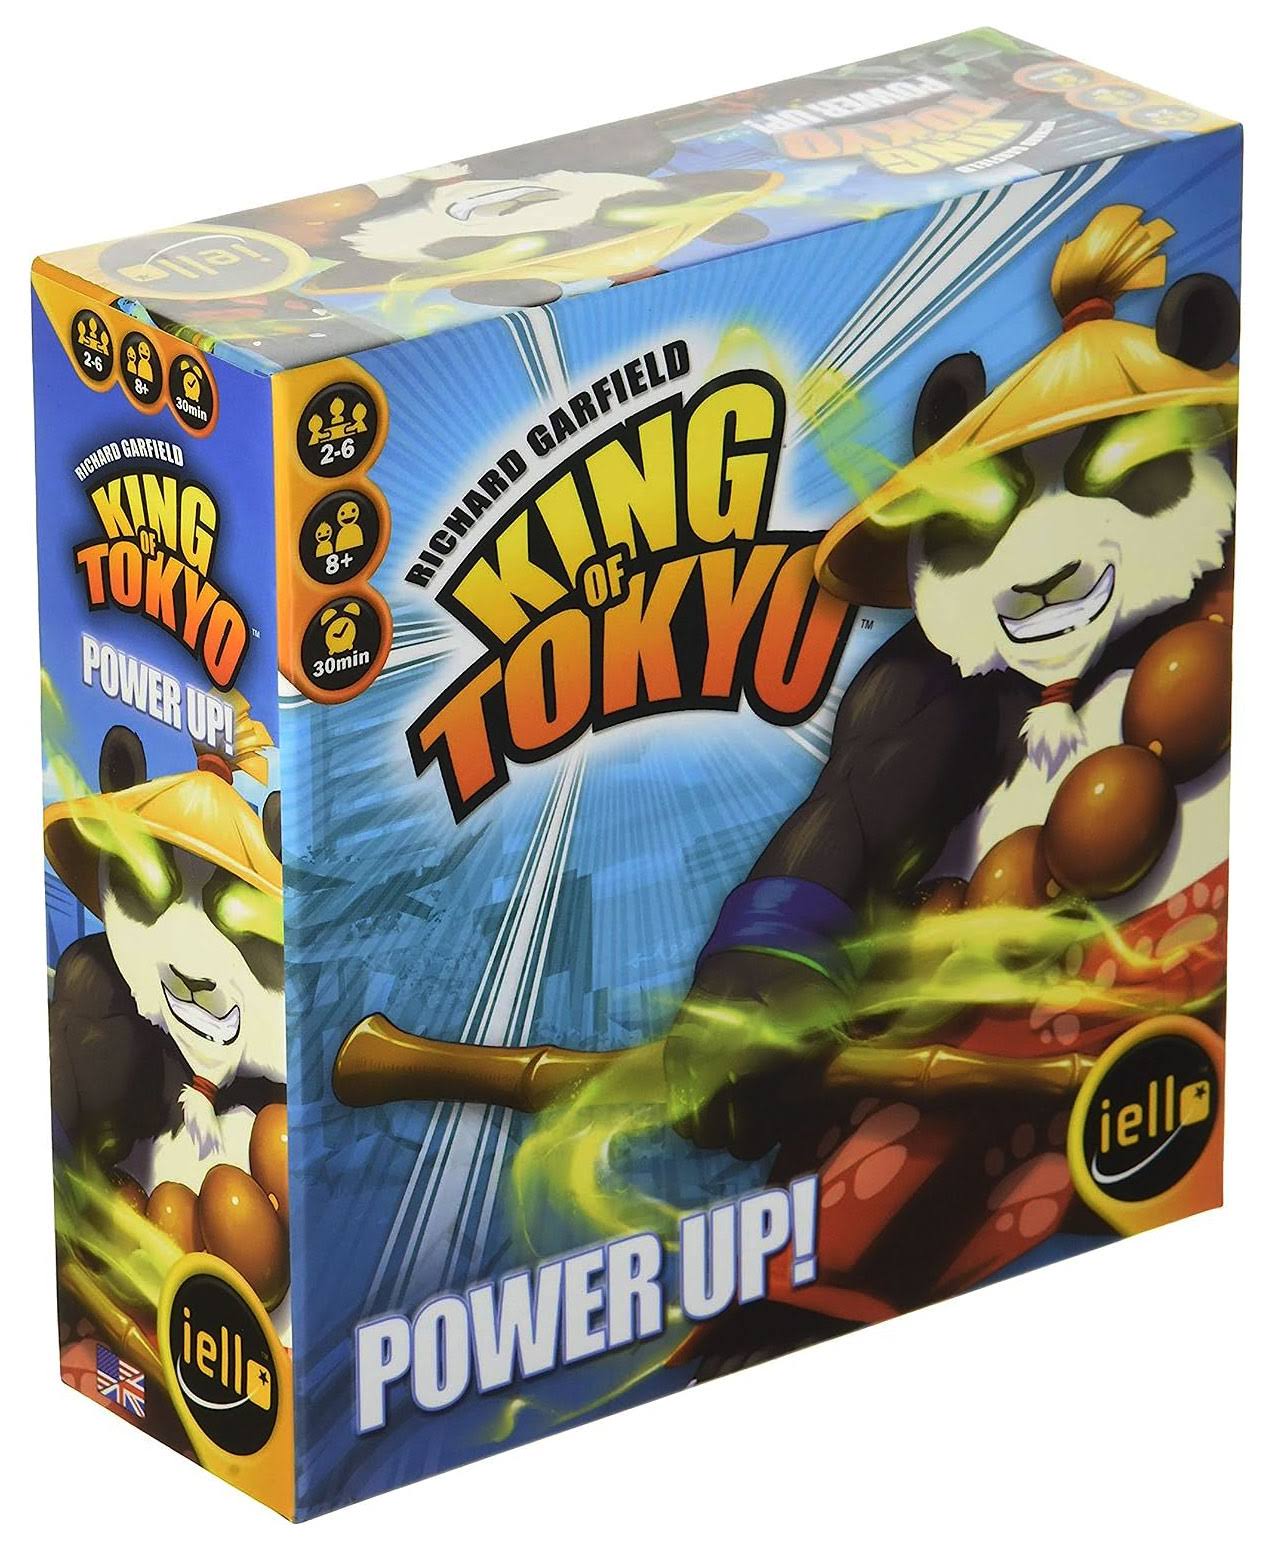 Iello King Of Tokyo Power Up